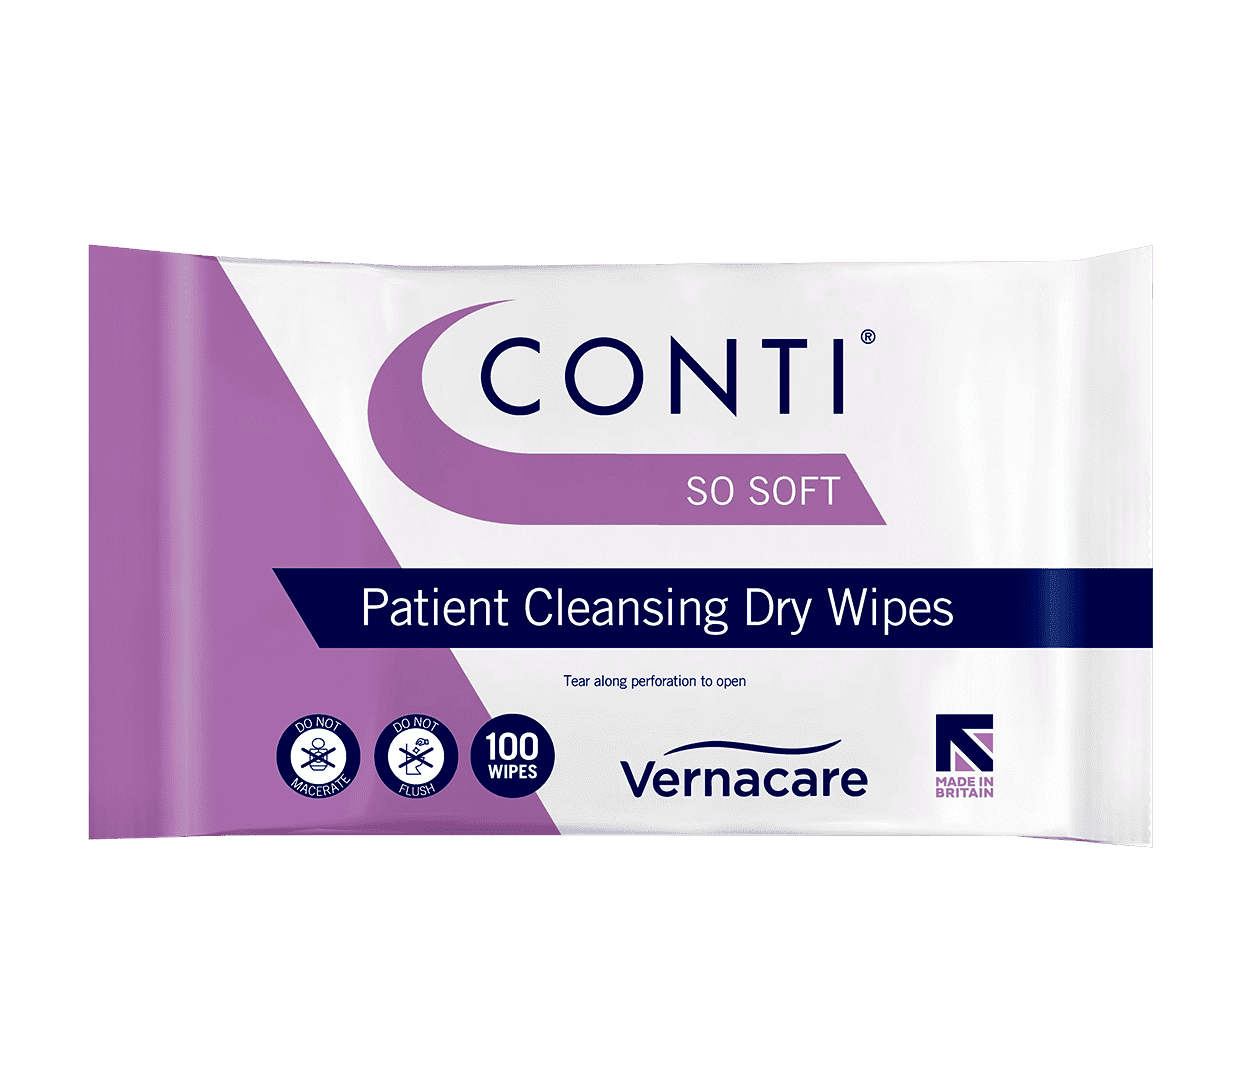 Patient dry wipes made from heavy-weight cotton and viscose-enriched material. dry wipes which provide increased texture and softness for effective cleansing of sensitive skin. These dry wipes are popular with home users.